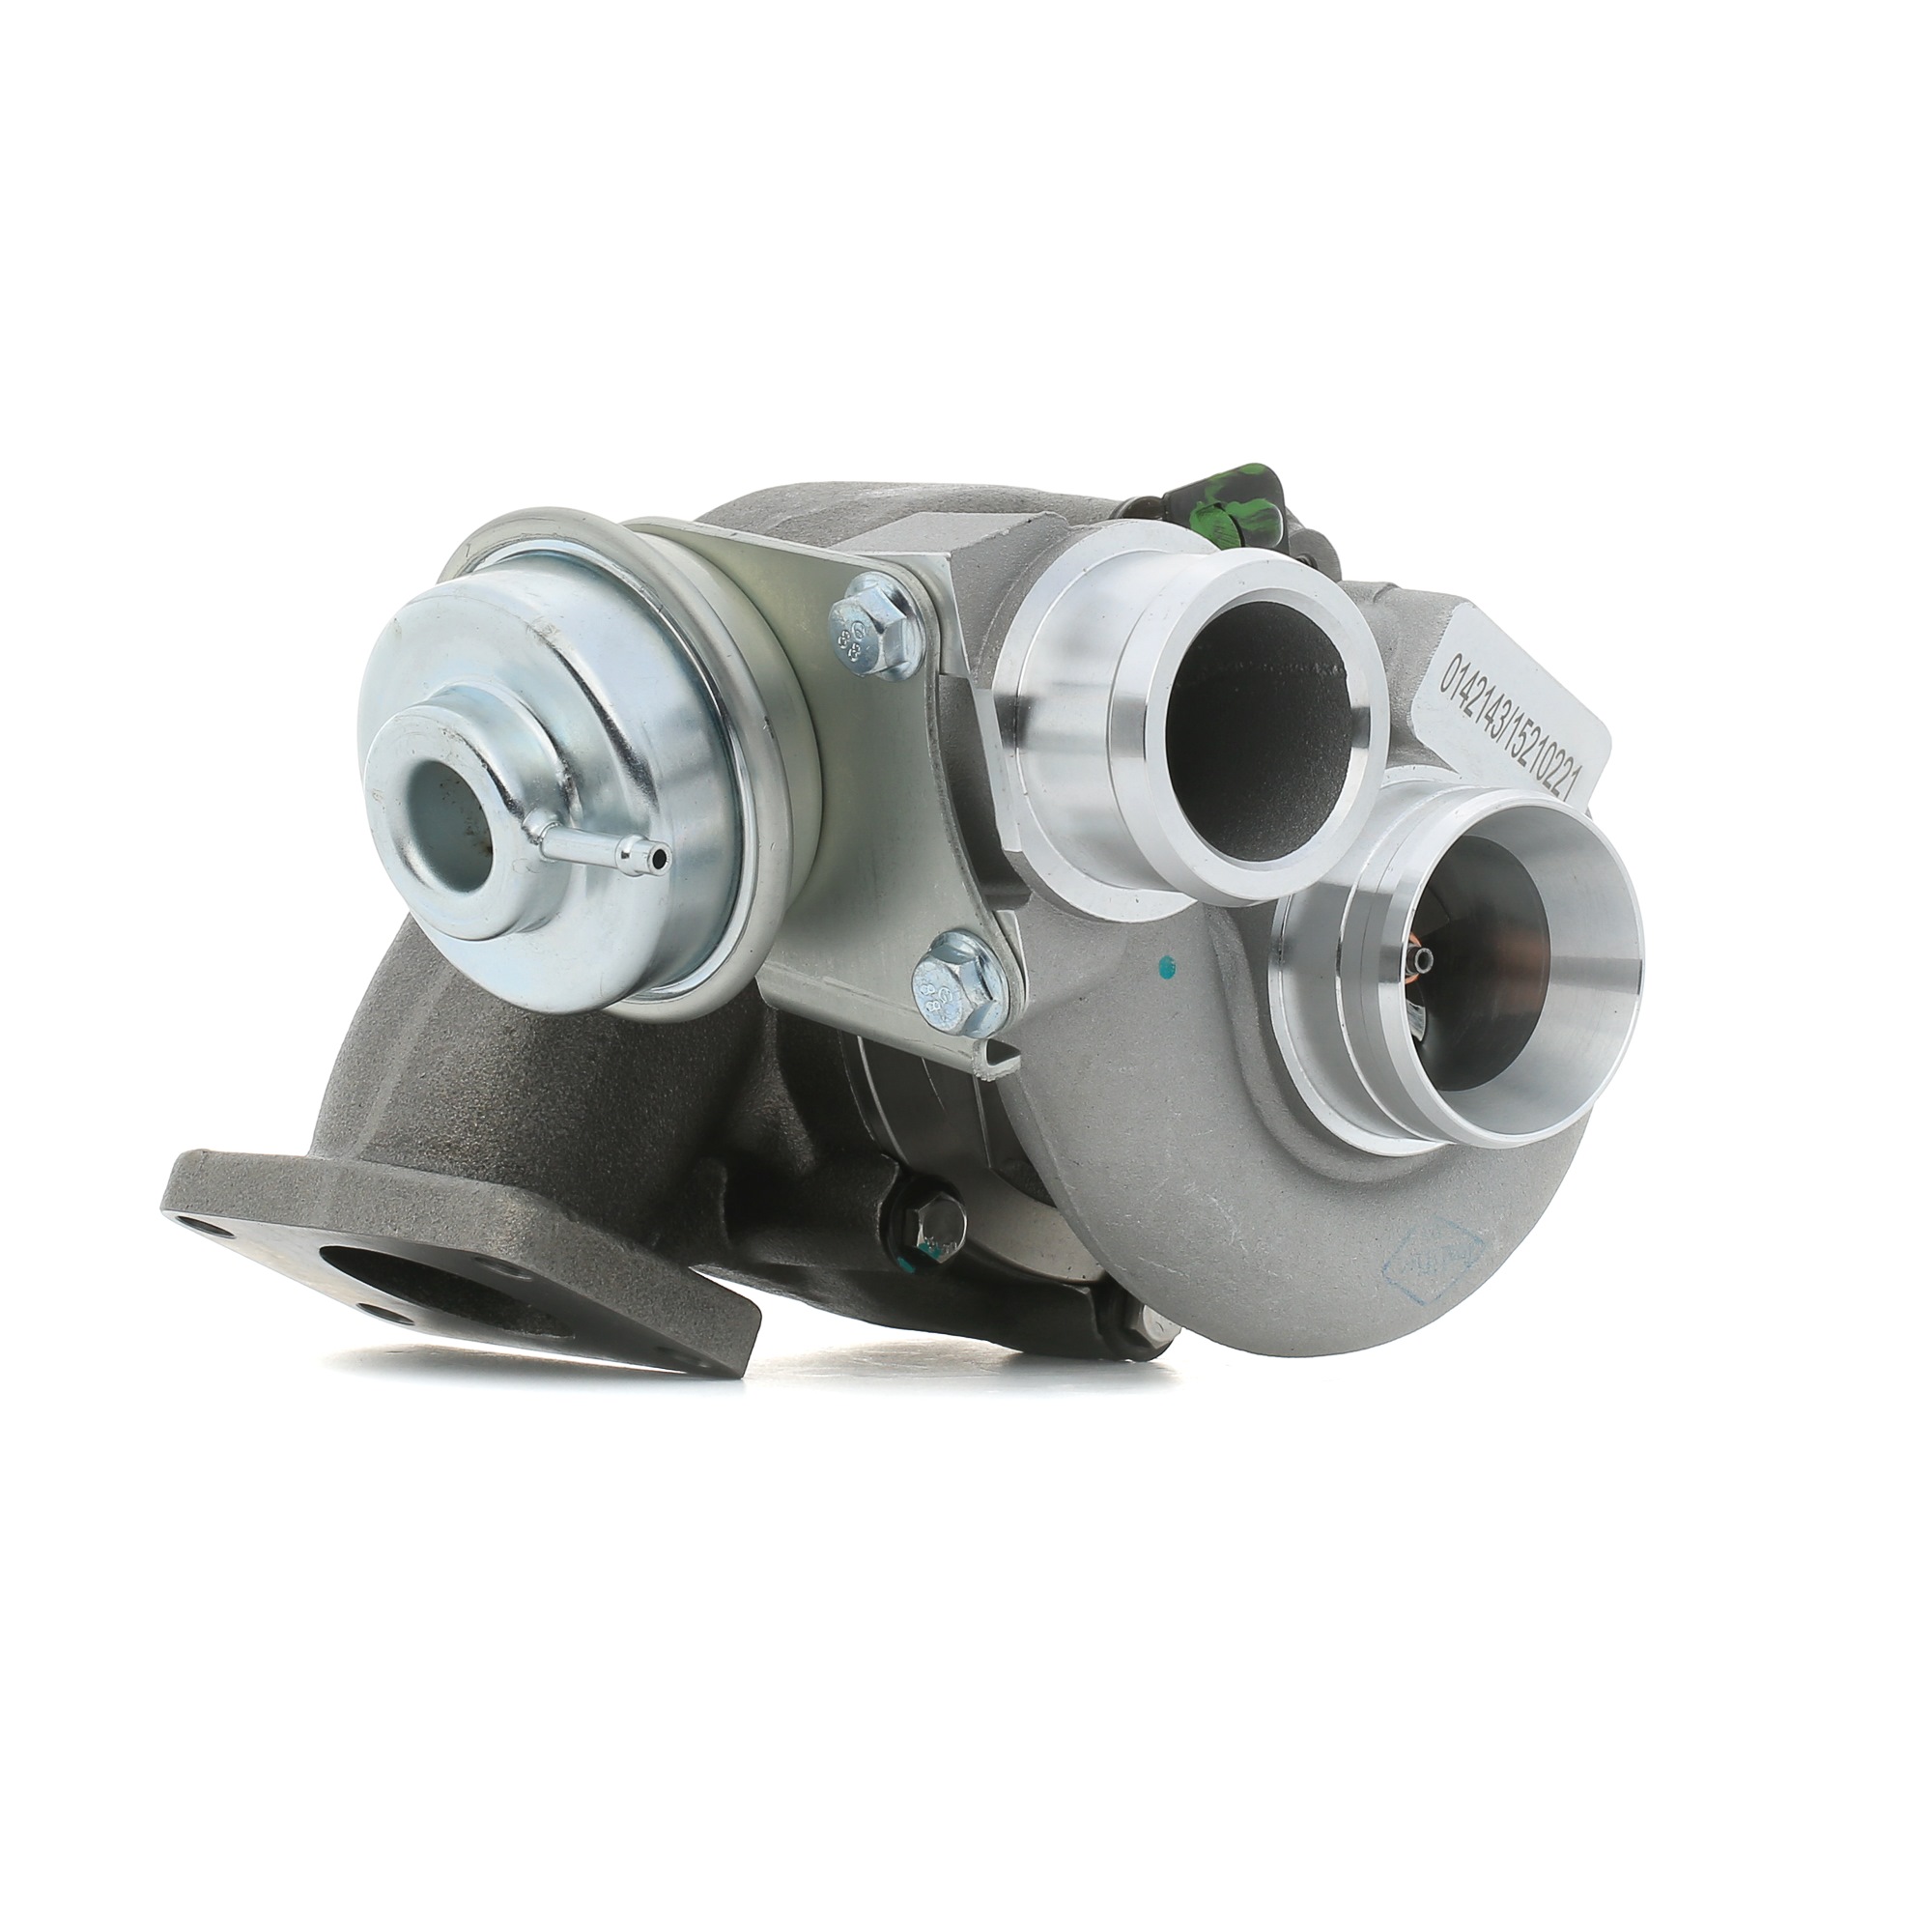 STARK SKCT-1190192 Turbocharger Exhaust Turbocharger, Euro 4 (D4), Air cooled, Vacuum-controlled, with gaskets/seals